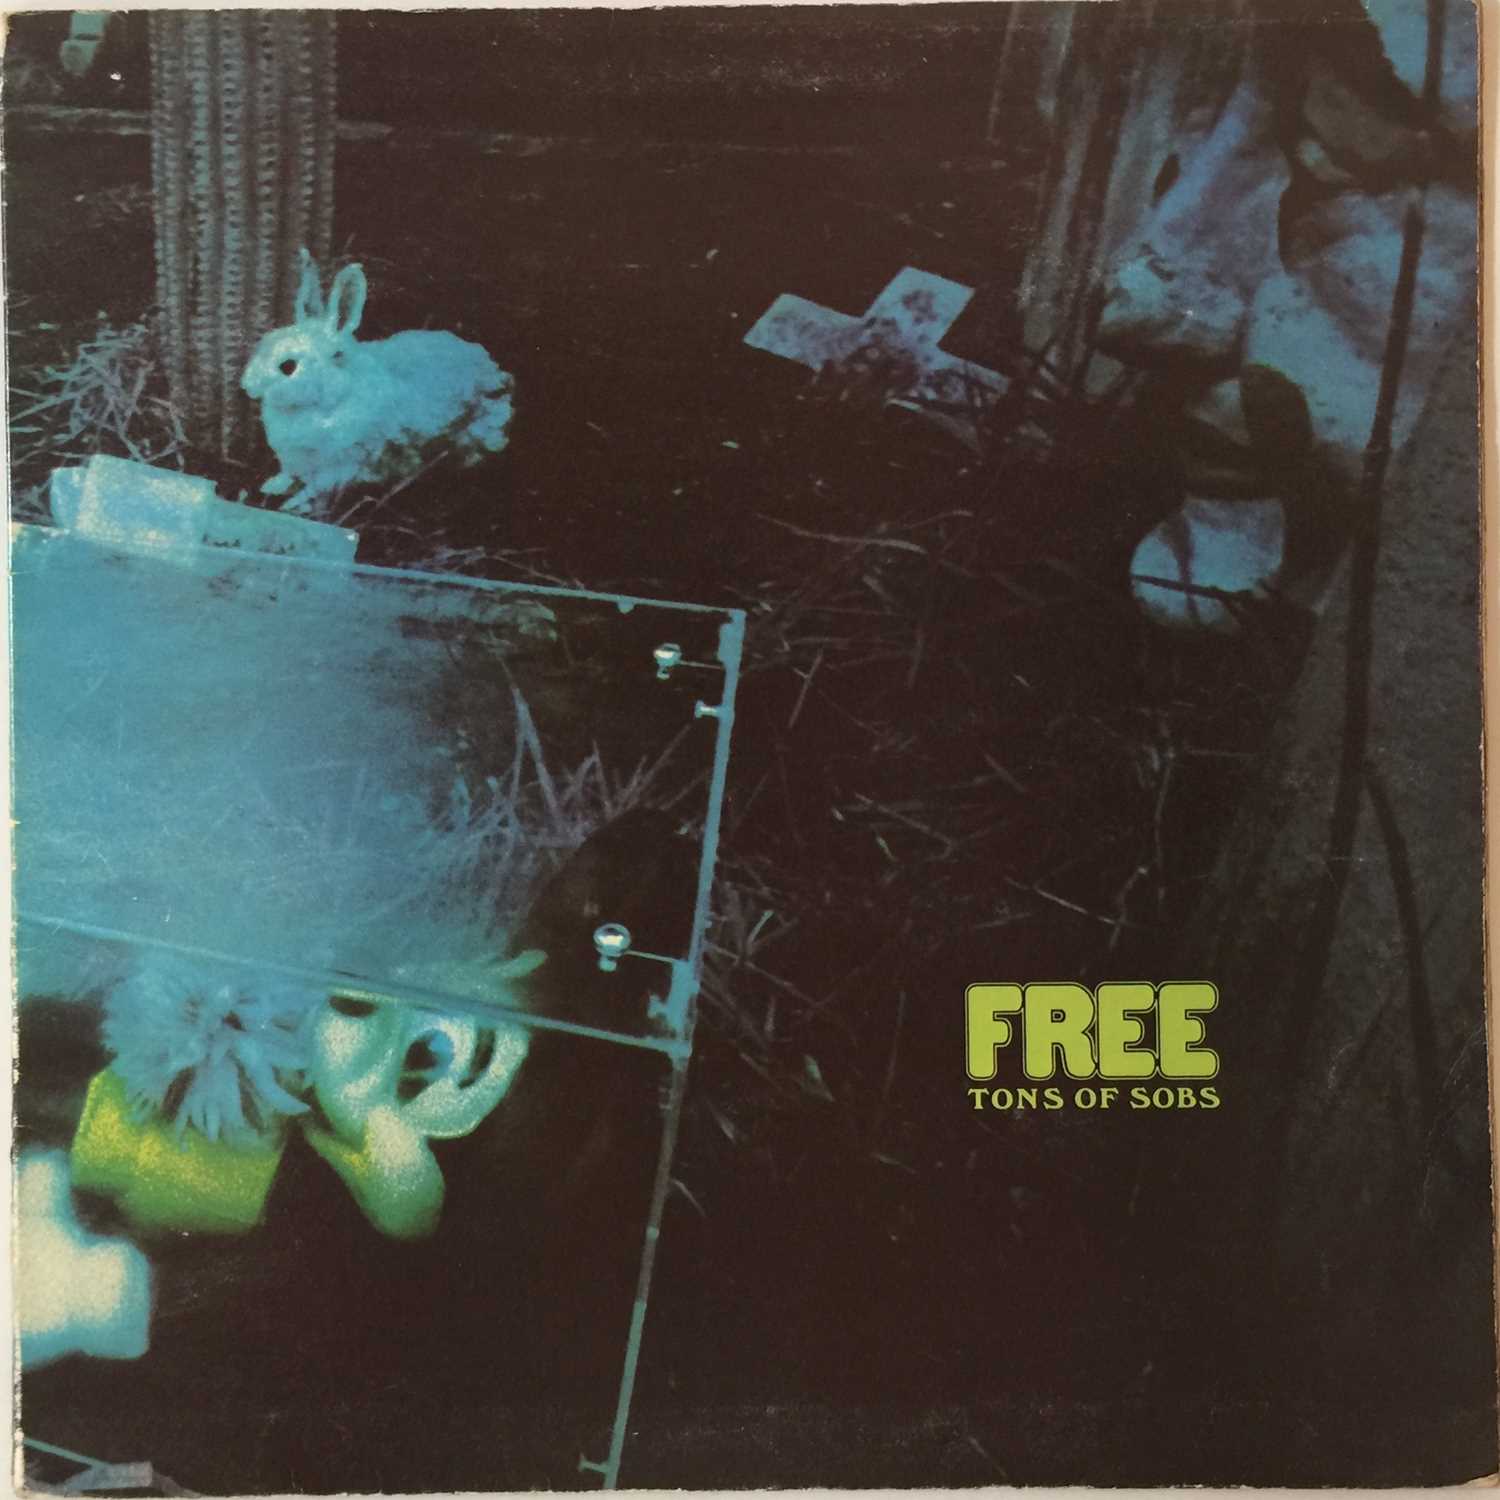 Lot 625 - FREE - TONS OF SOBS LP (2ND UK 1969 PRESSING